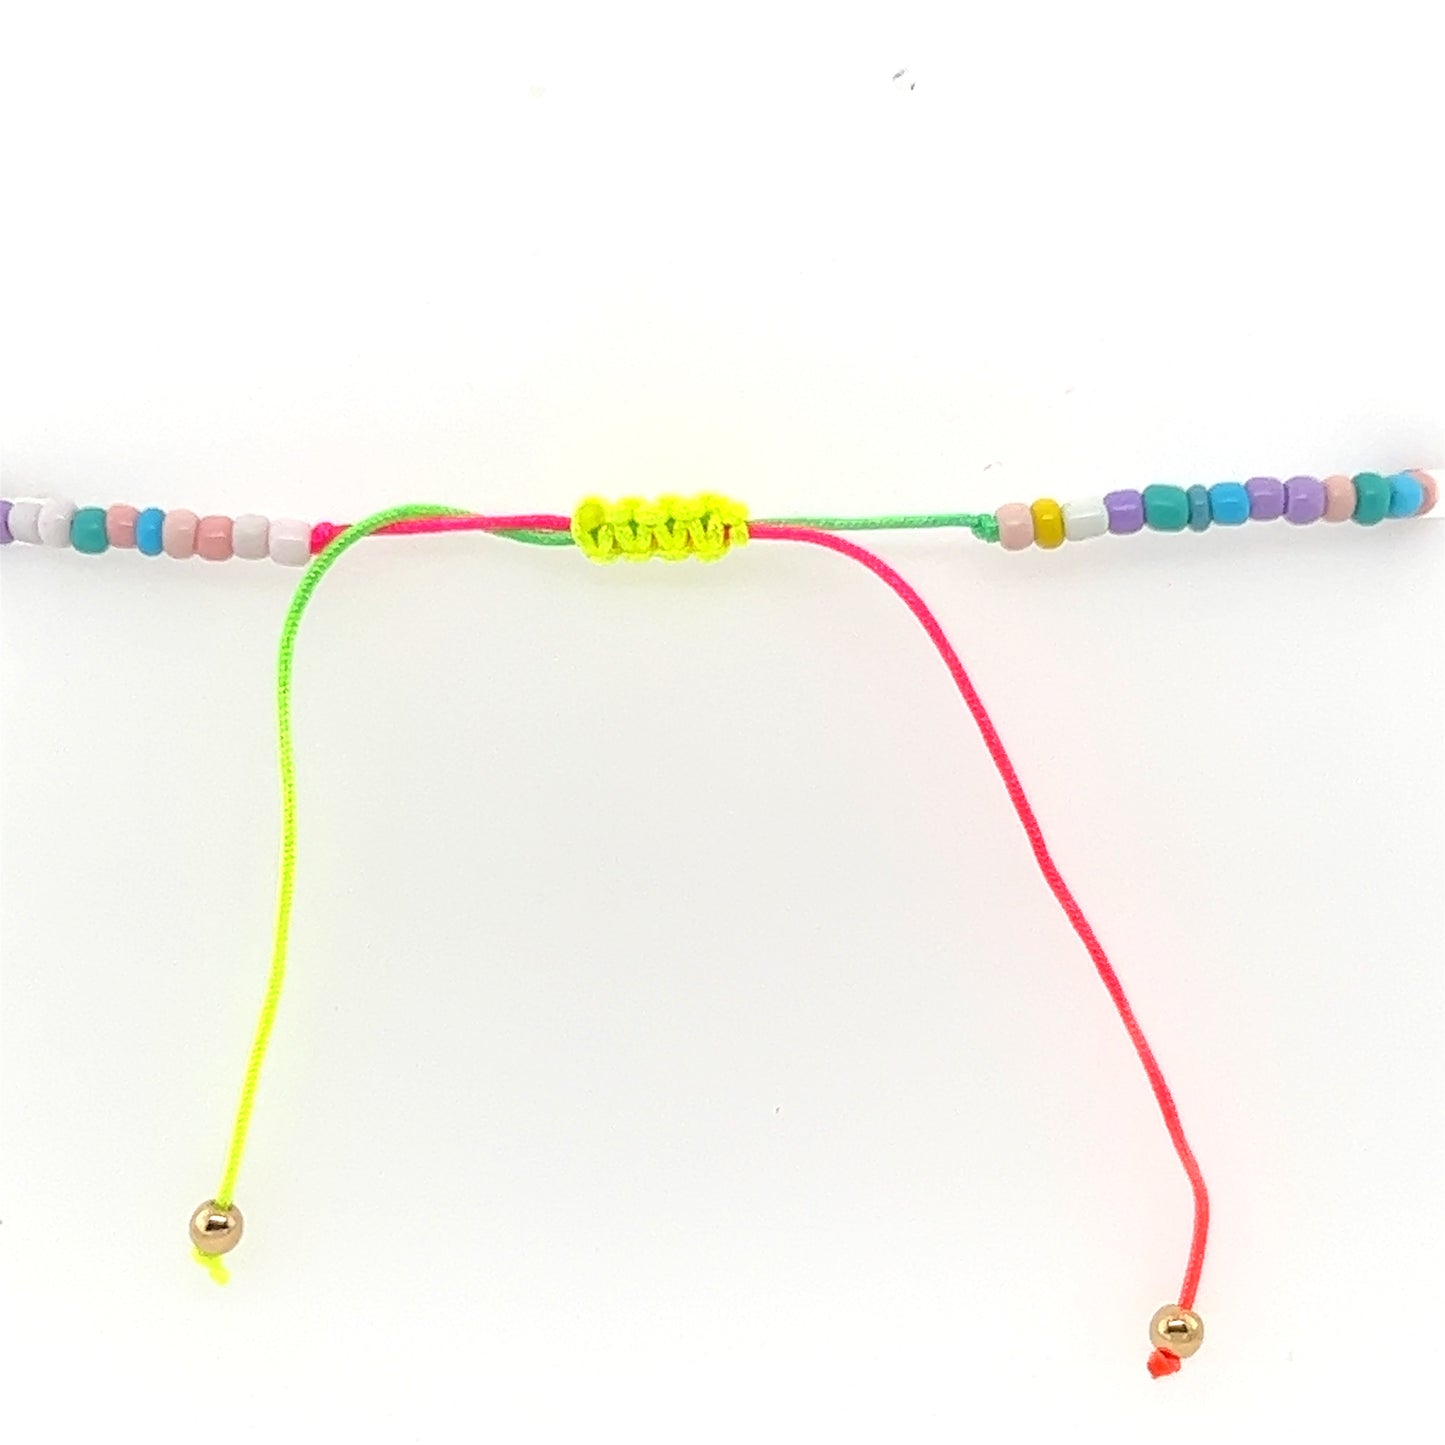 Pastel Smiley Face & Star Multi-Color Beaded Anklet